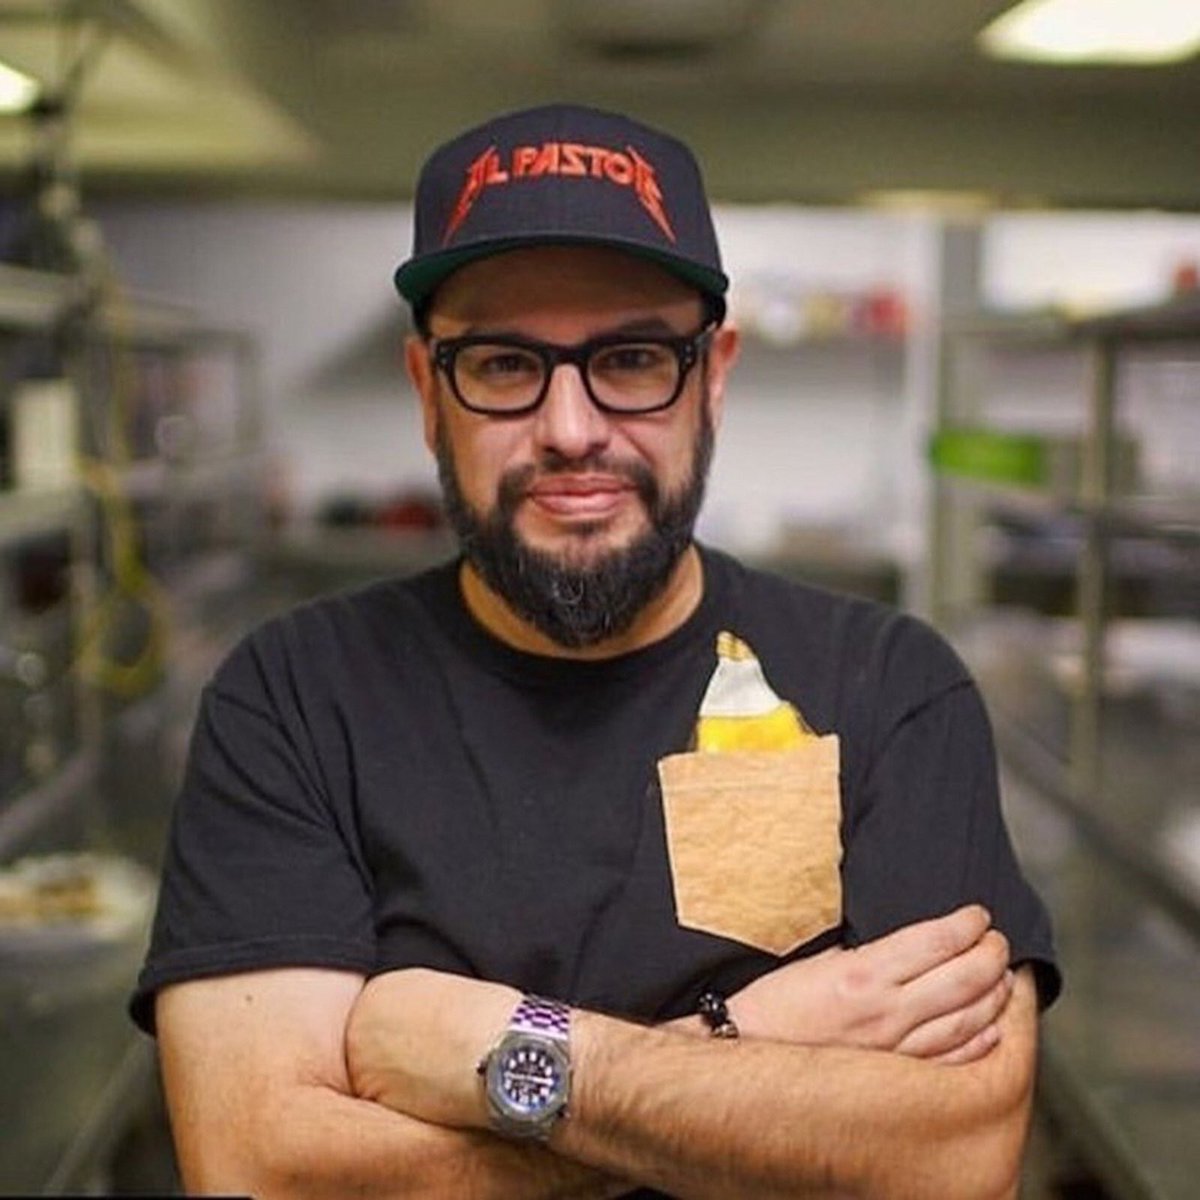 Carl Ruiz was an inspiration; a talented chef with the most amazing intellect. His charm, wit and generosity were without peer. My thoughts go out to his family. Carl, I miss you.